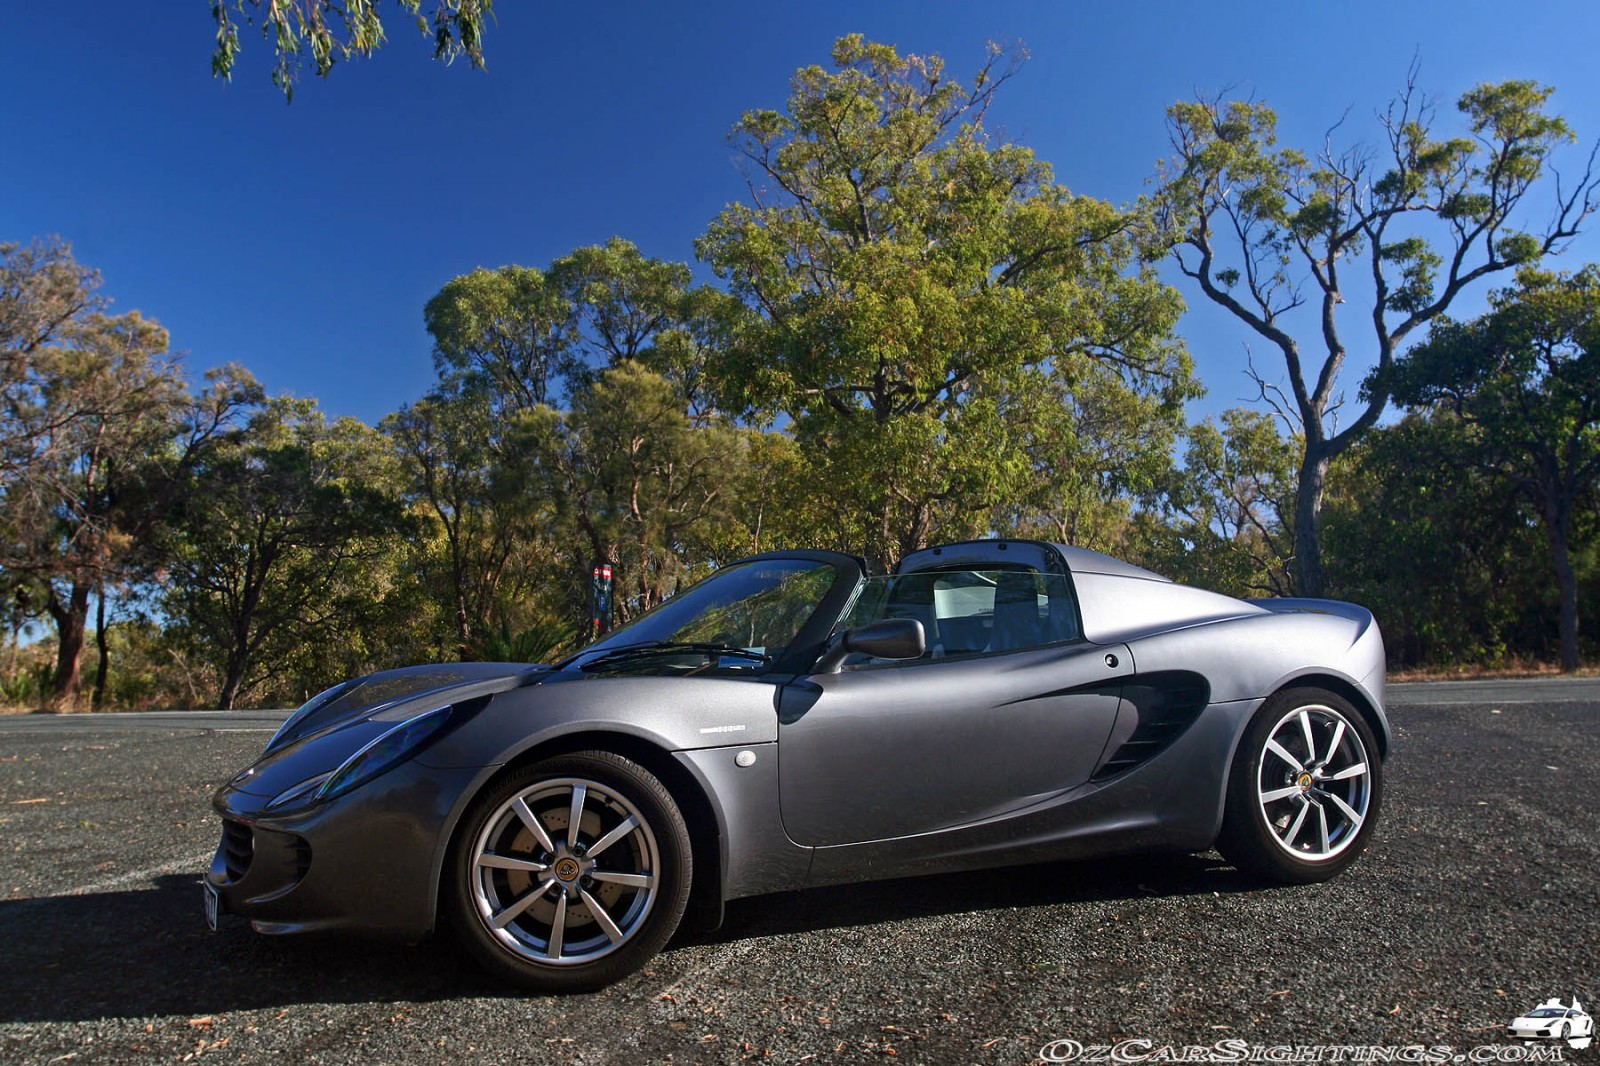 lotus elise related images,101 to 150 - Zuoda Images